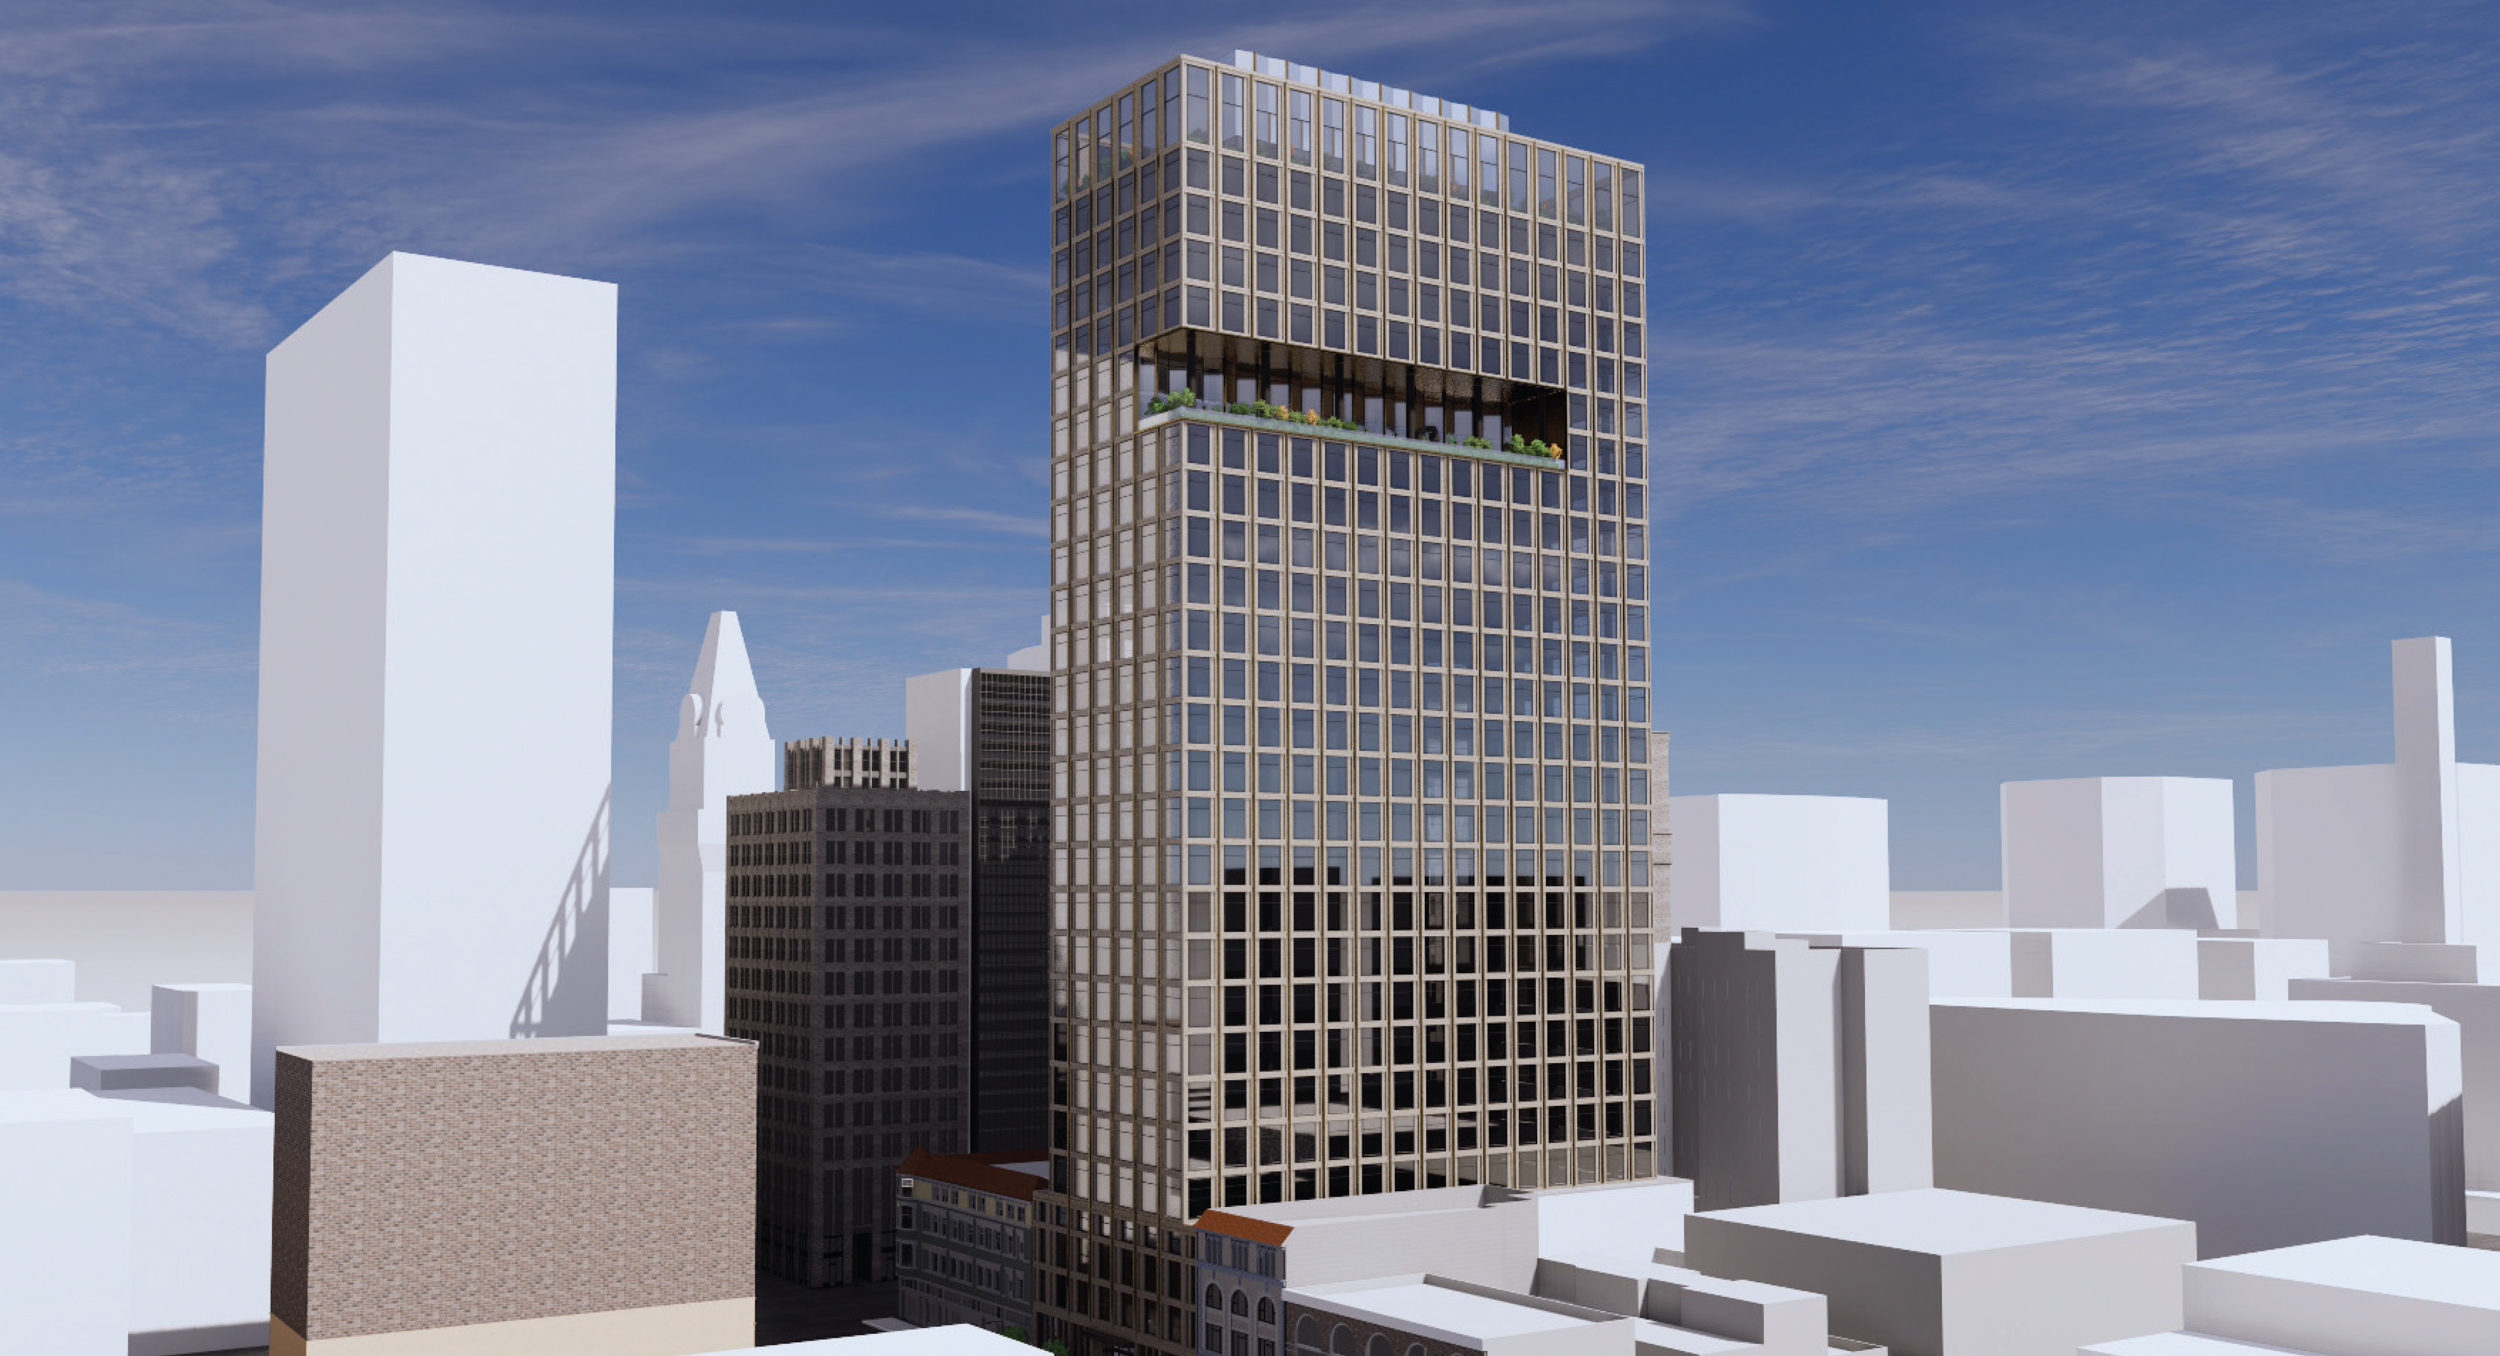 1431 Franklin Street office version, rendering by LARGE Architecture